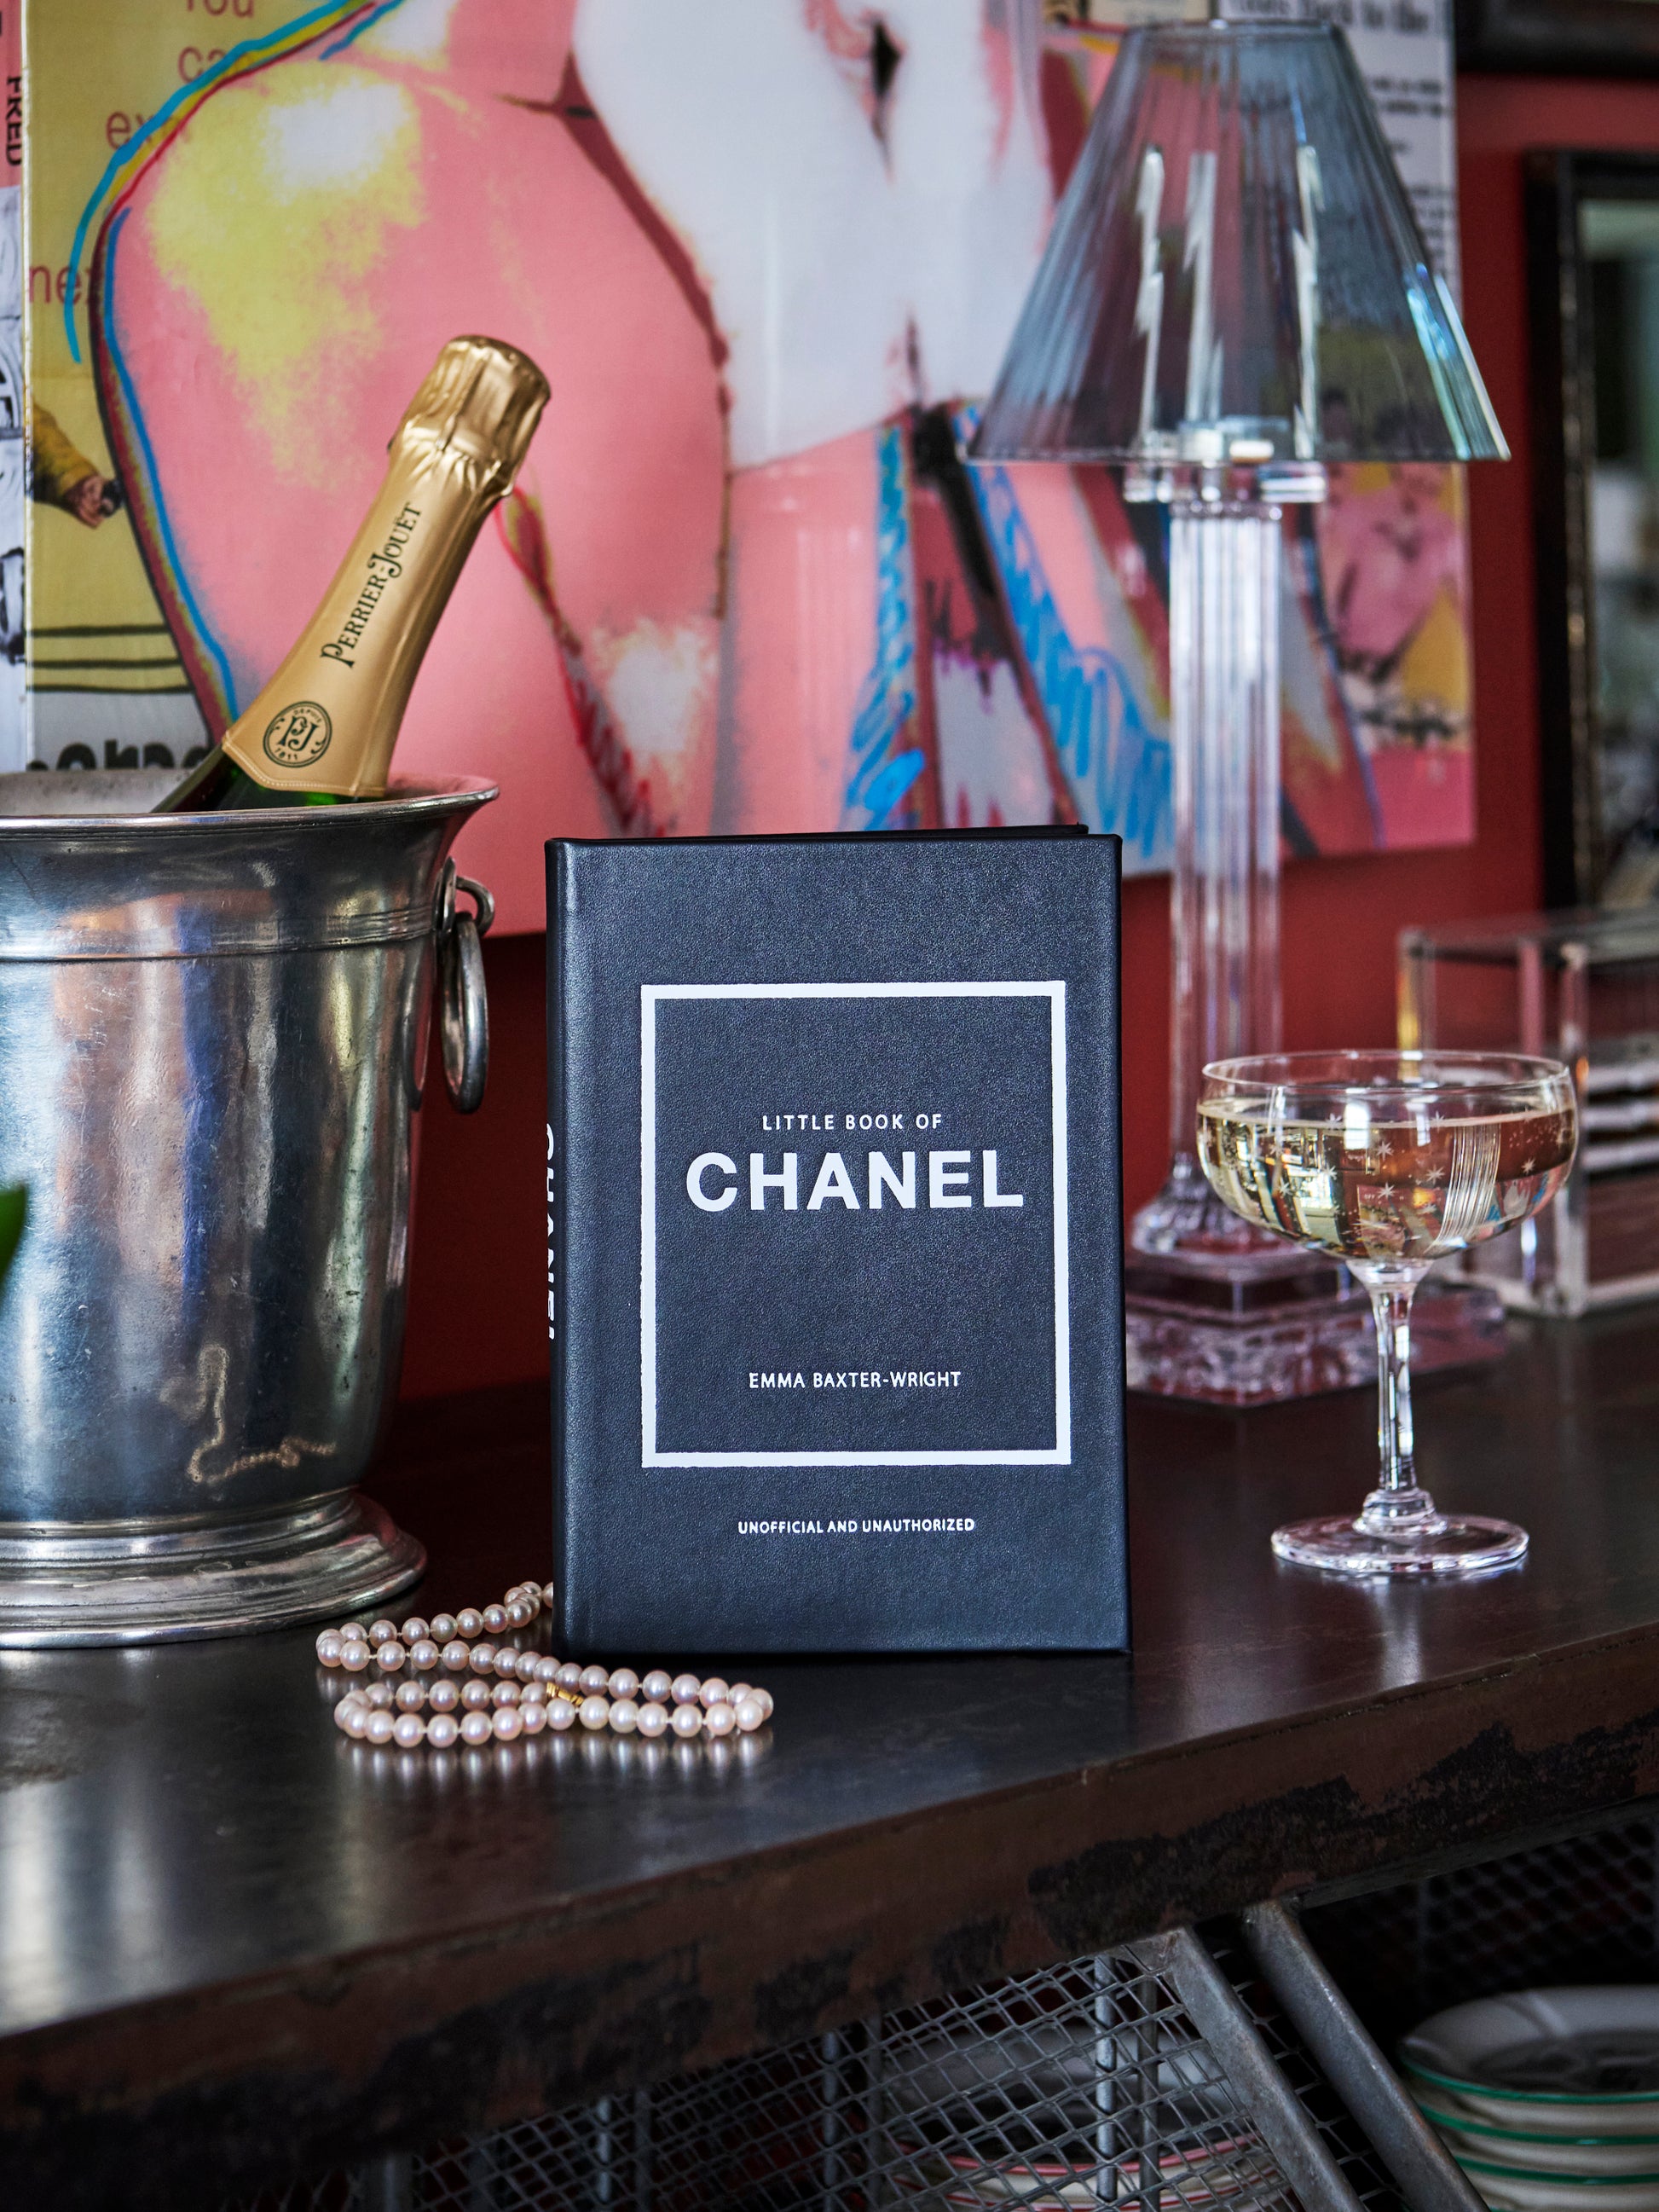 Shop the Little Book of Chanel Leather Bound Edition at Weston Table